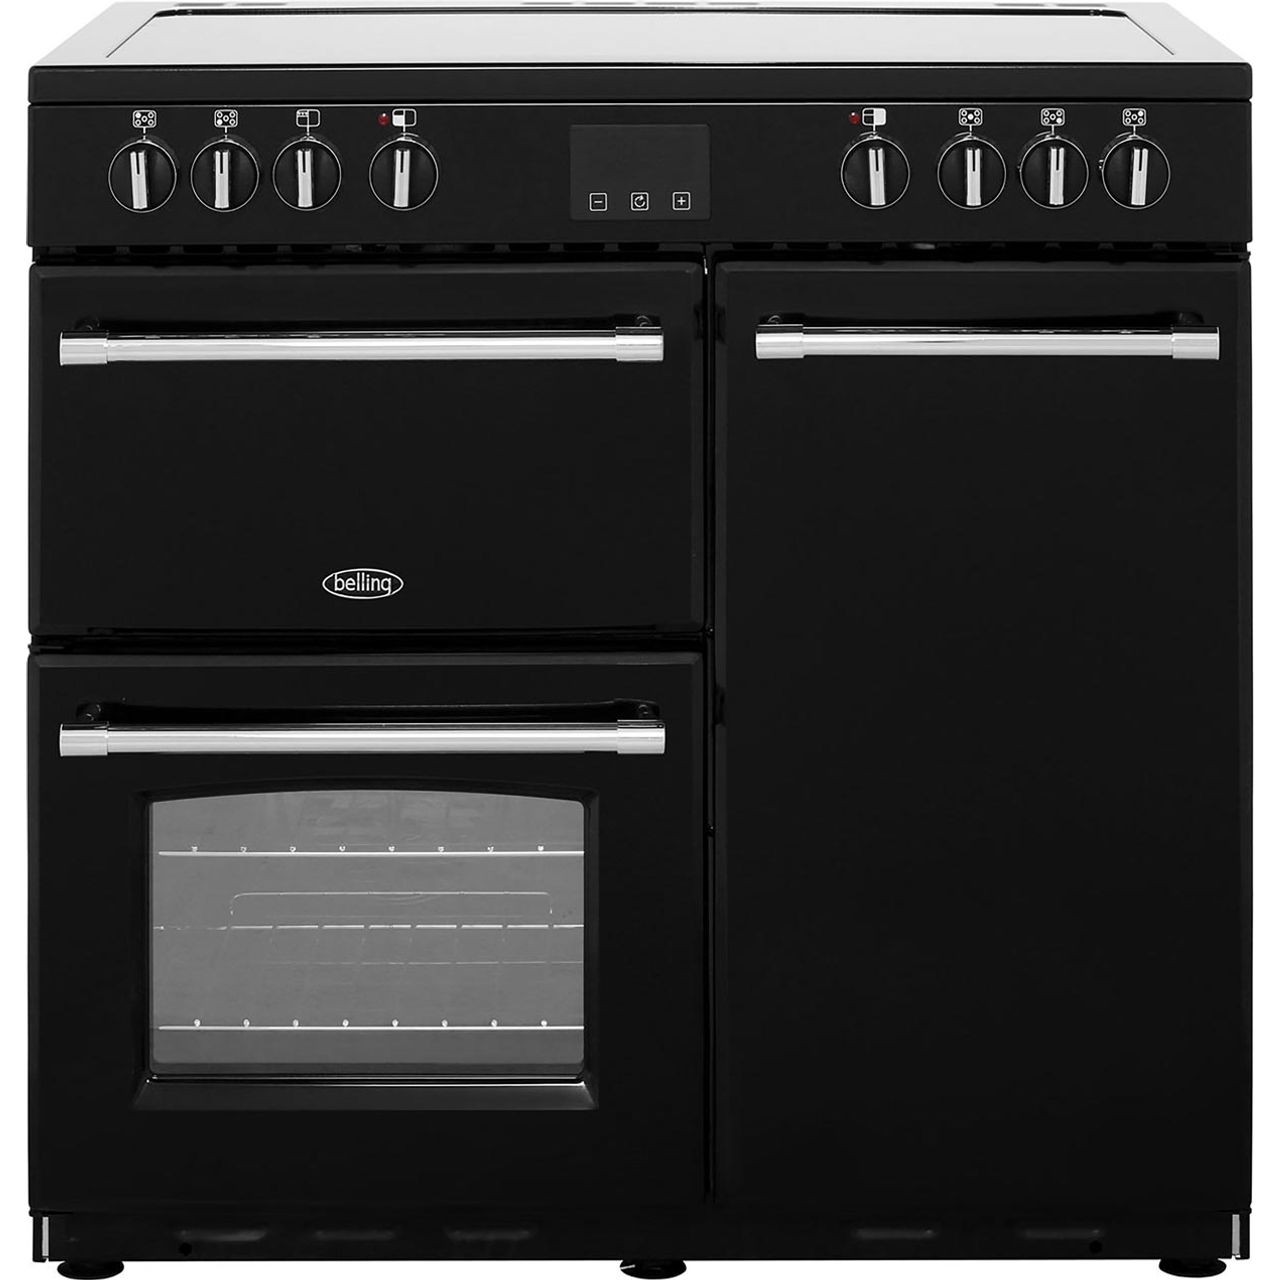 Belling Farmhouse90E 90cm Electric Range Cooker with Ceramic Hob Review